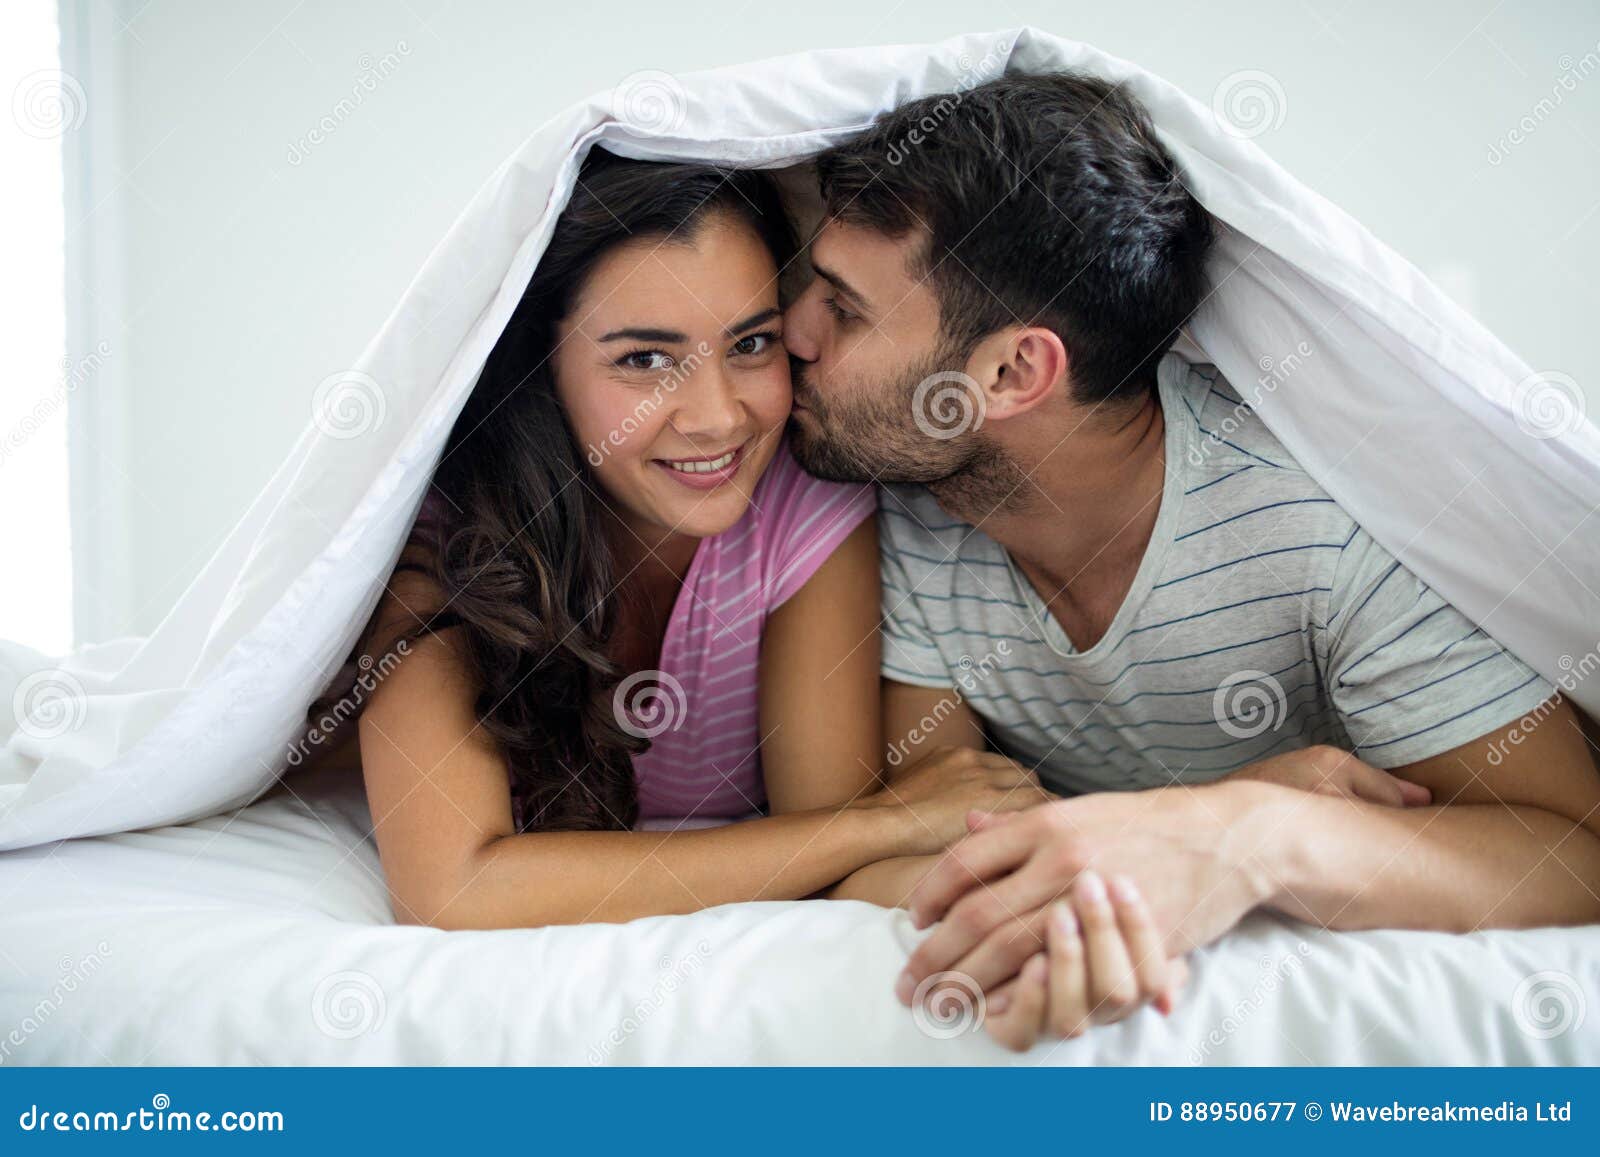 Man Kissing Woman Under Blanket In The Bedroom Stock Image Image Of